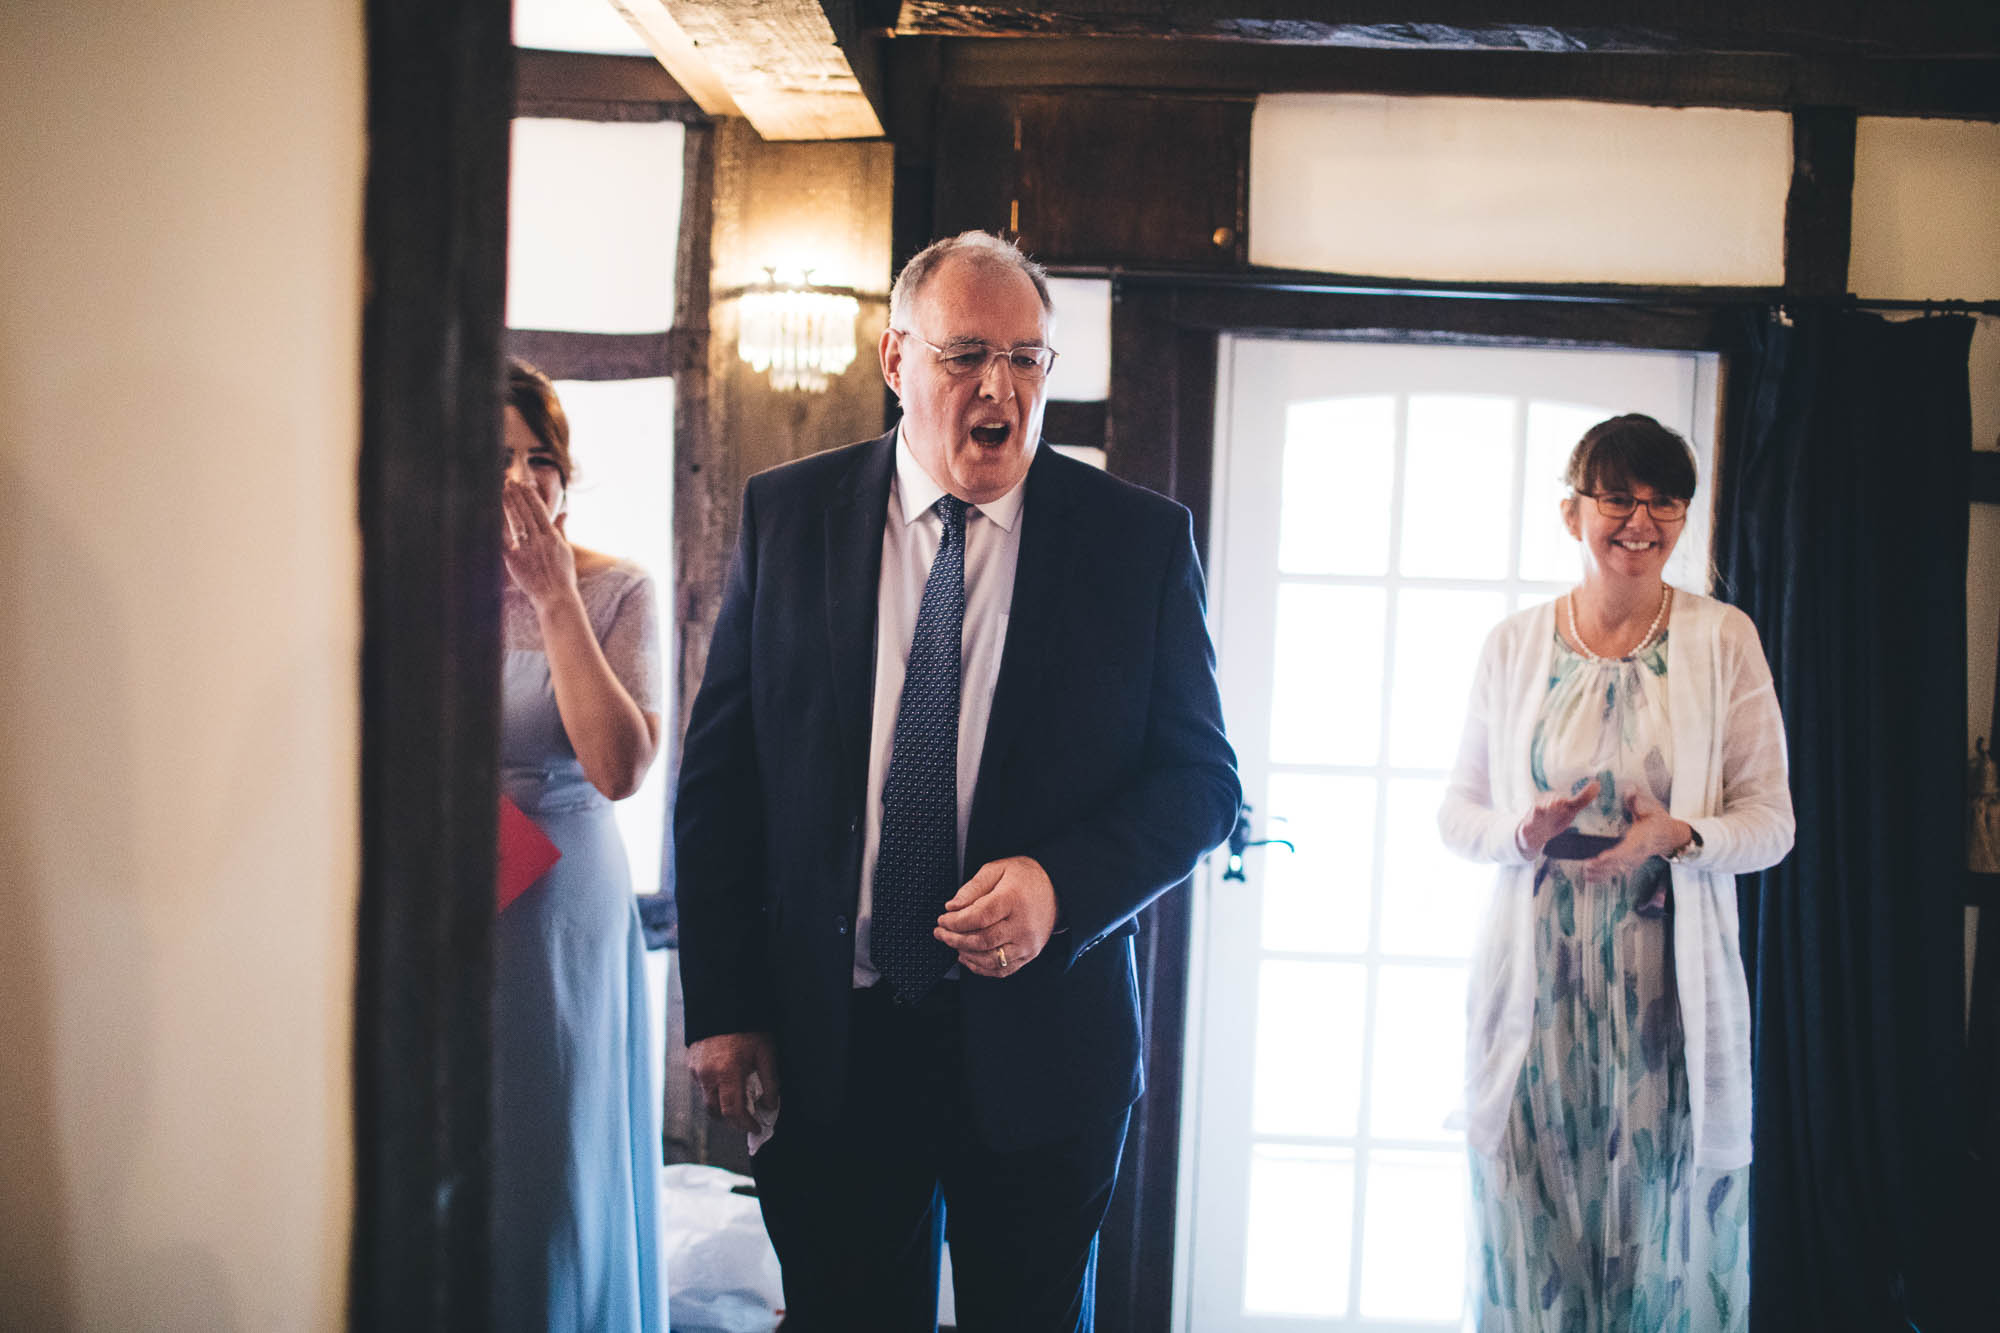 Father of Bride looks shocked as he sees bride for first time in wedding dress